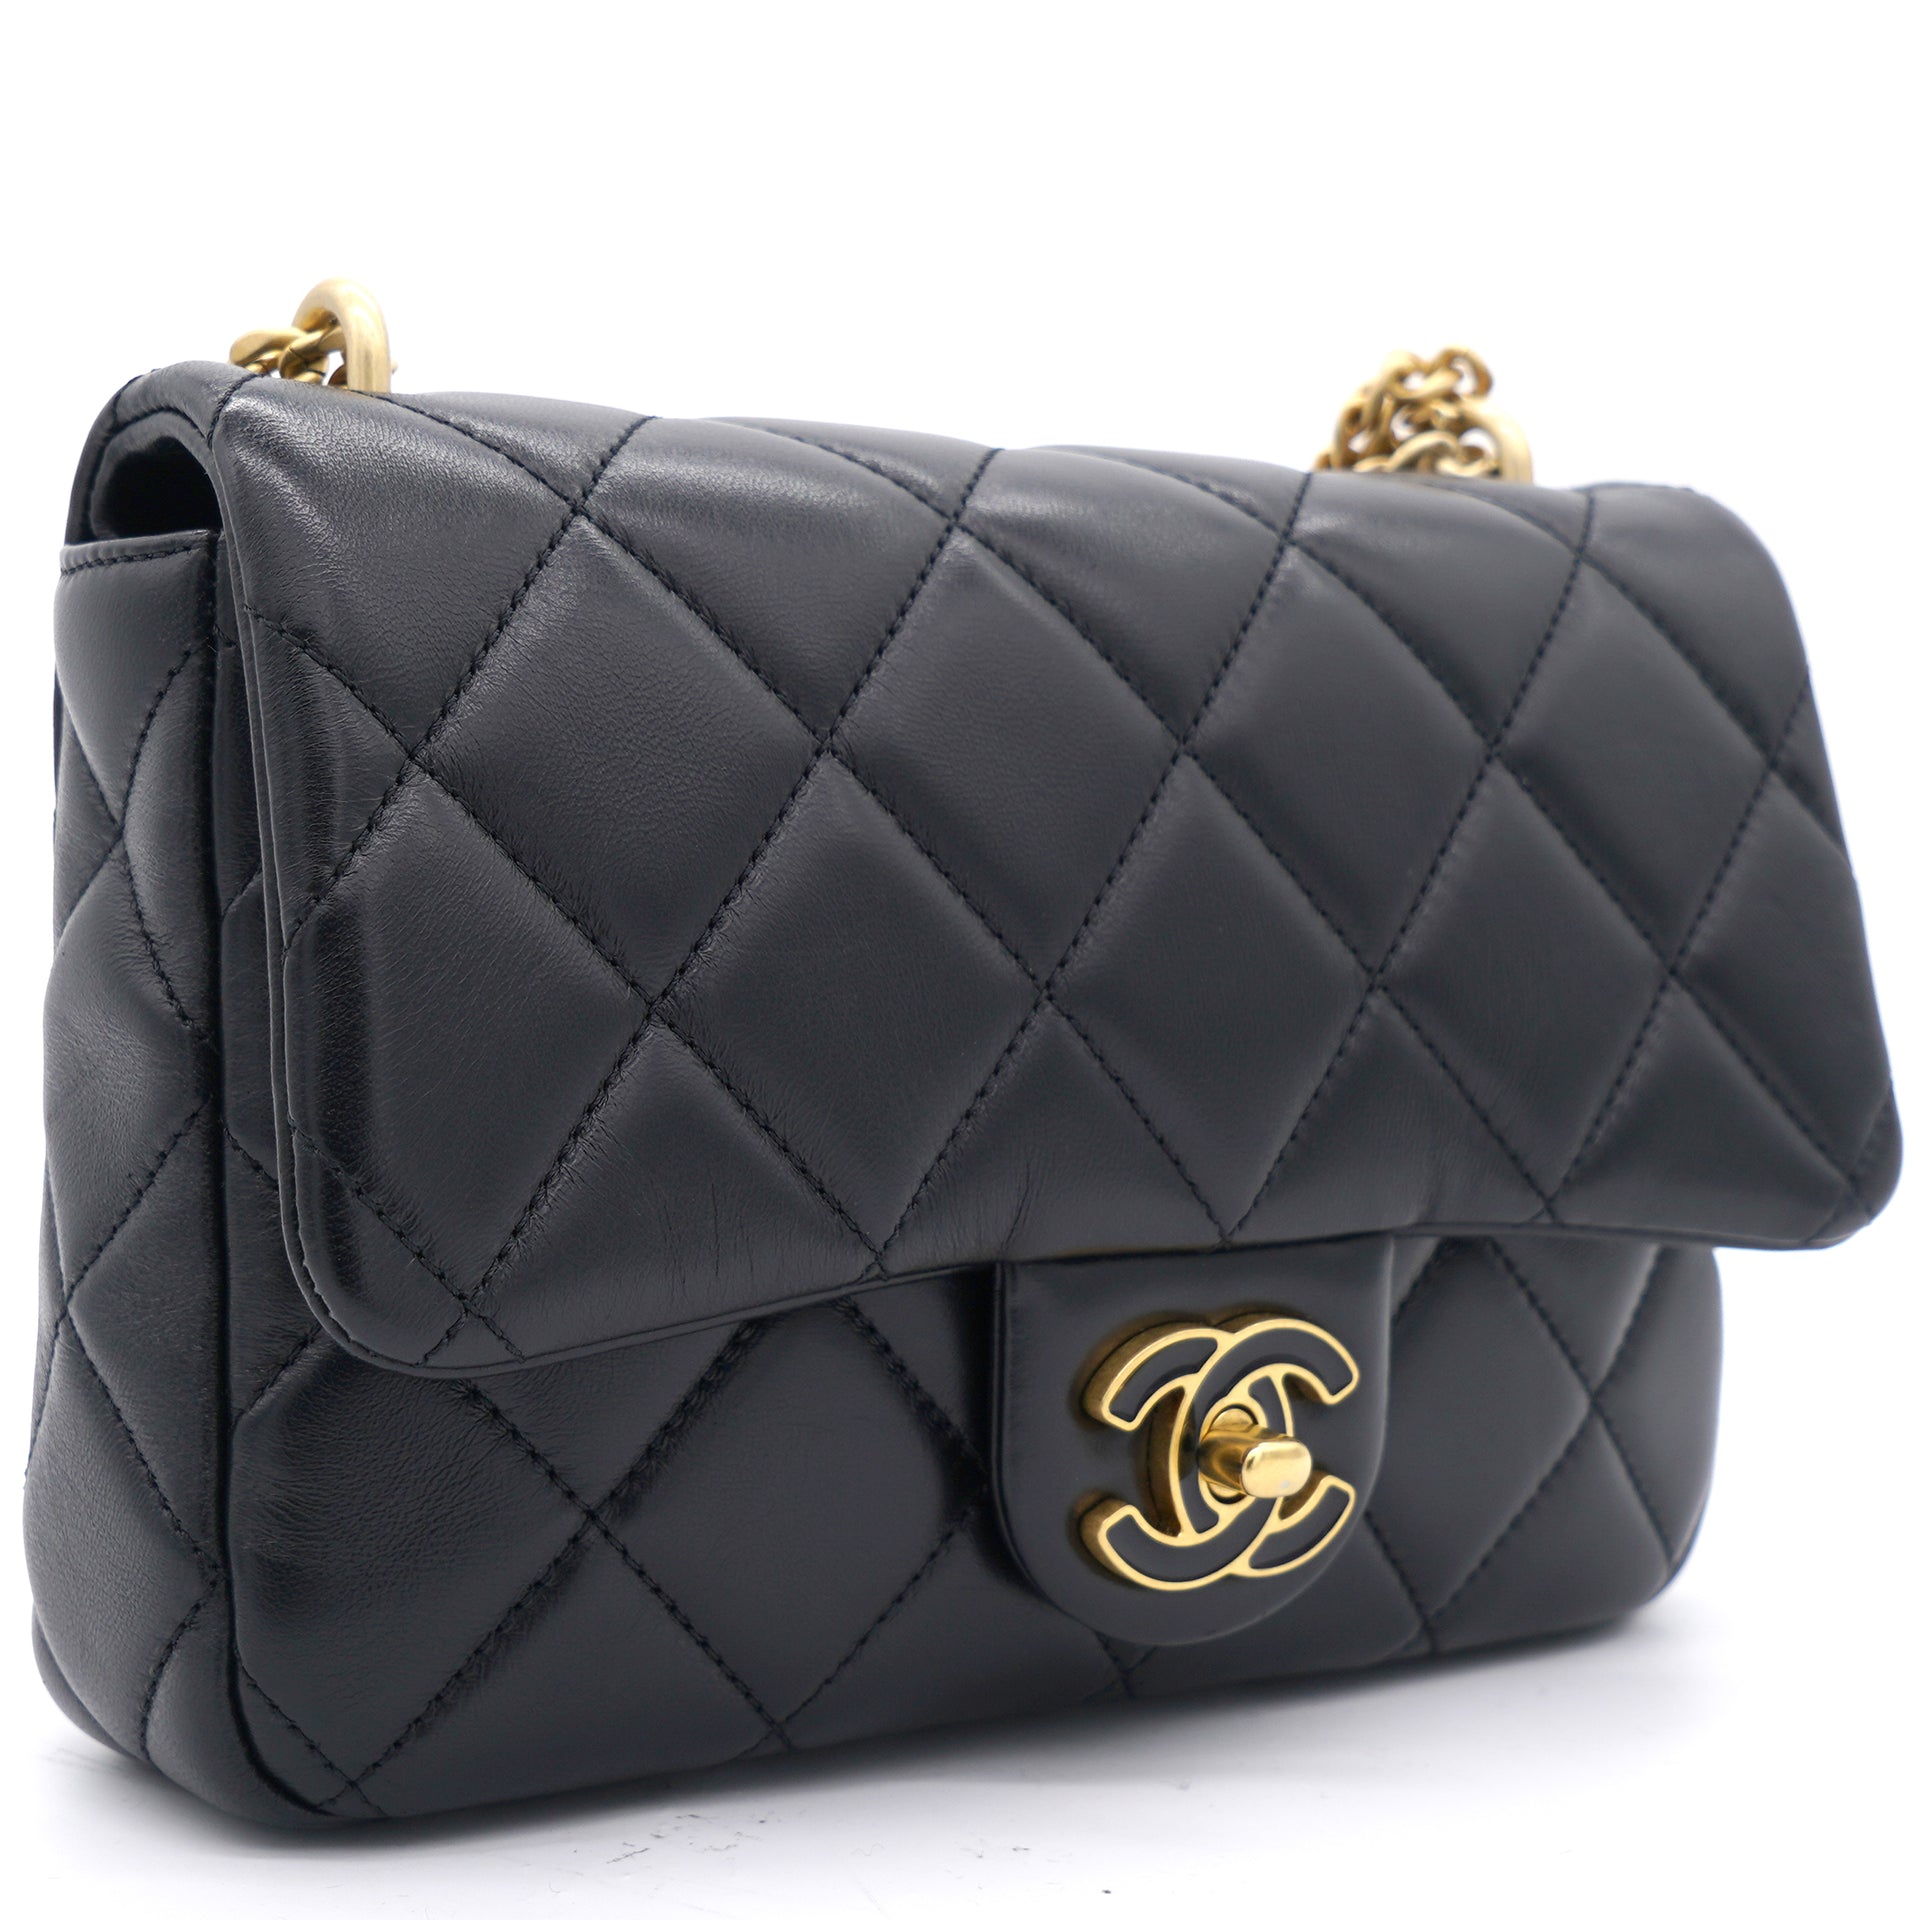 Chanel Grained Calfskin Stitched Small WOC CC Flap Bag Pink Chain Flap   MyDesignerly